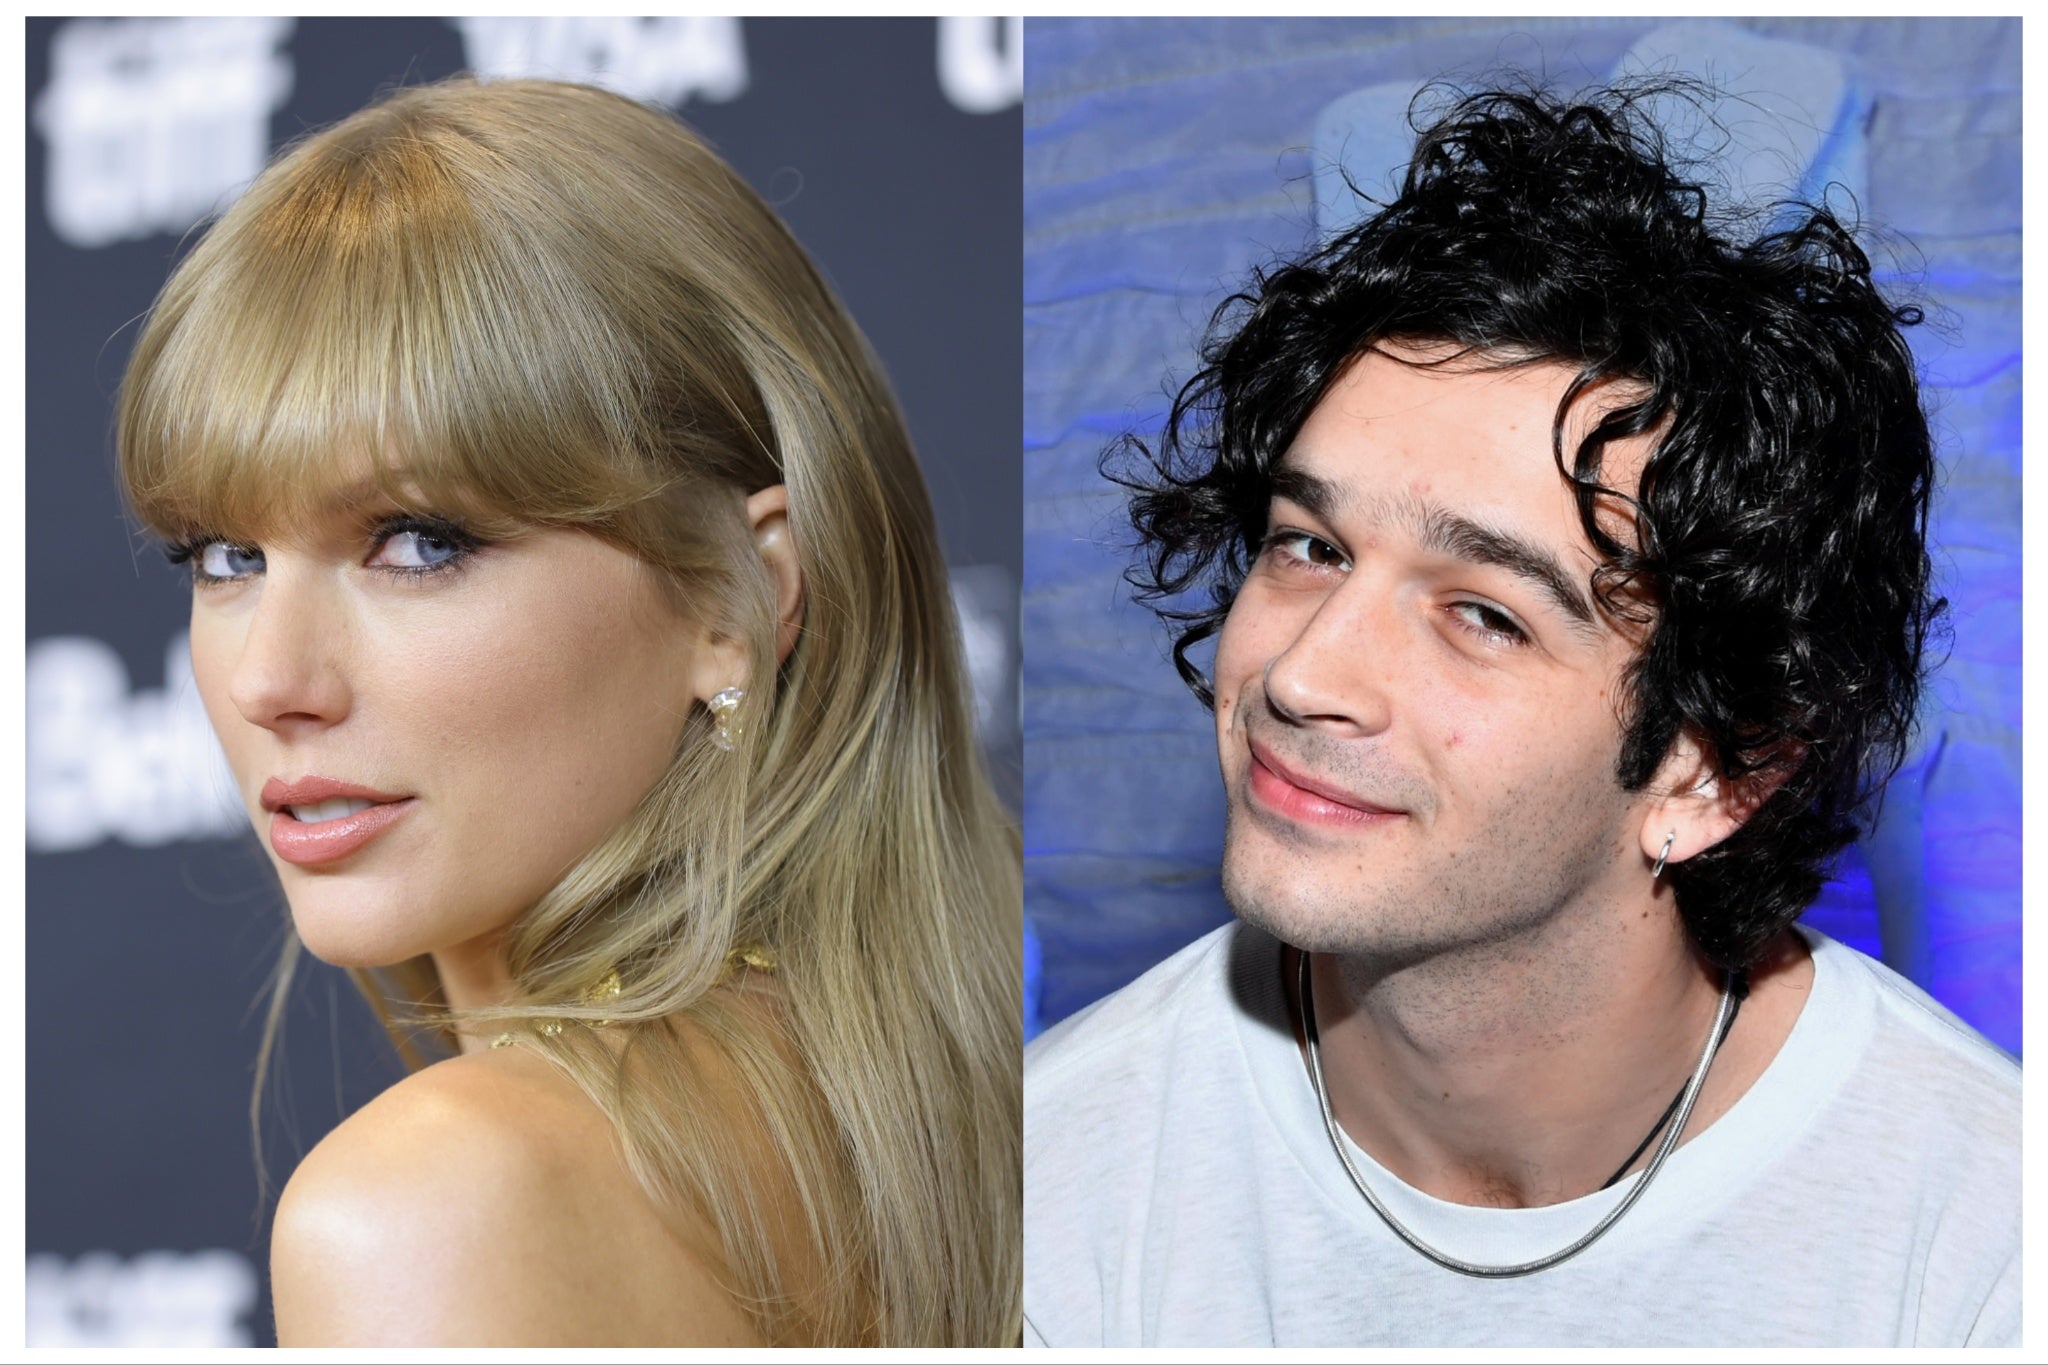 Taylor Swift and the 1975’s Matty Healy